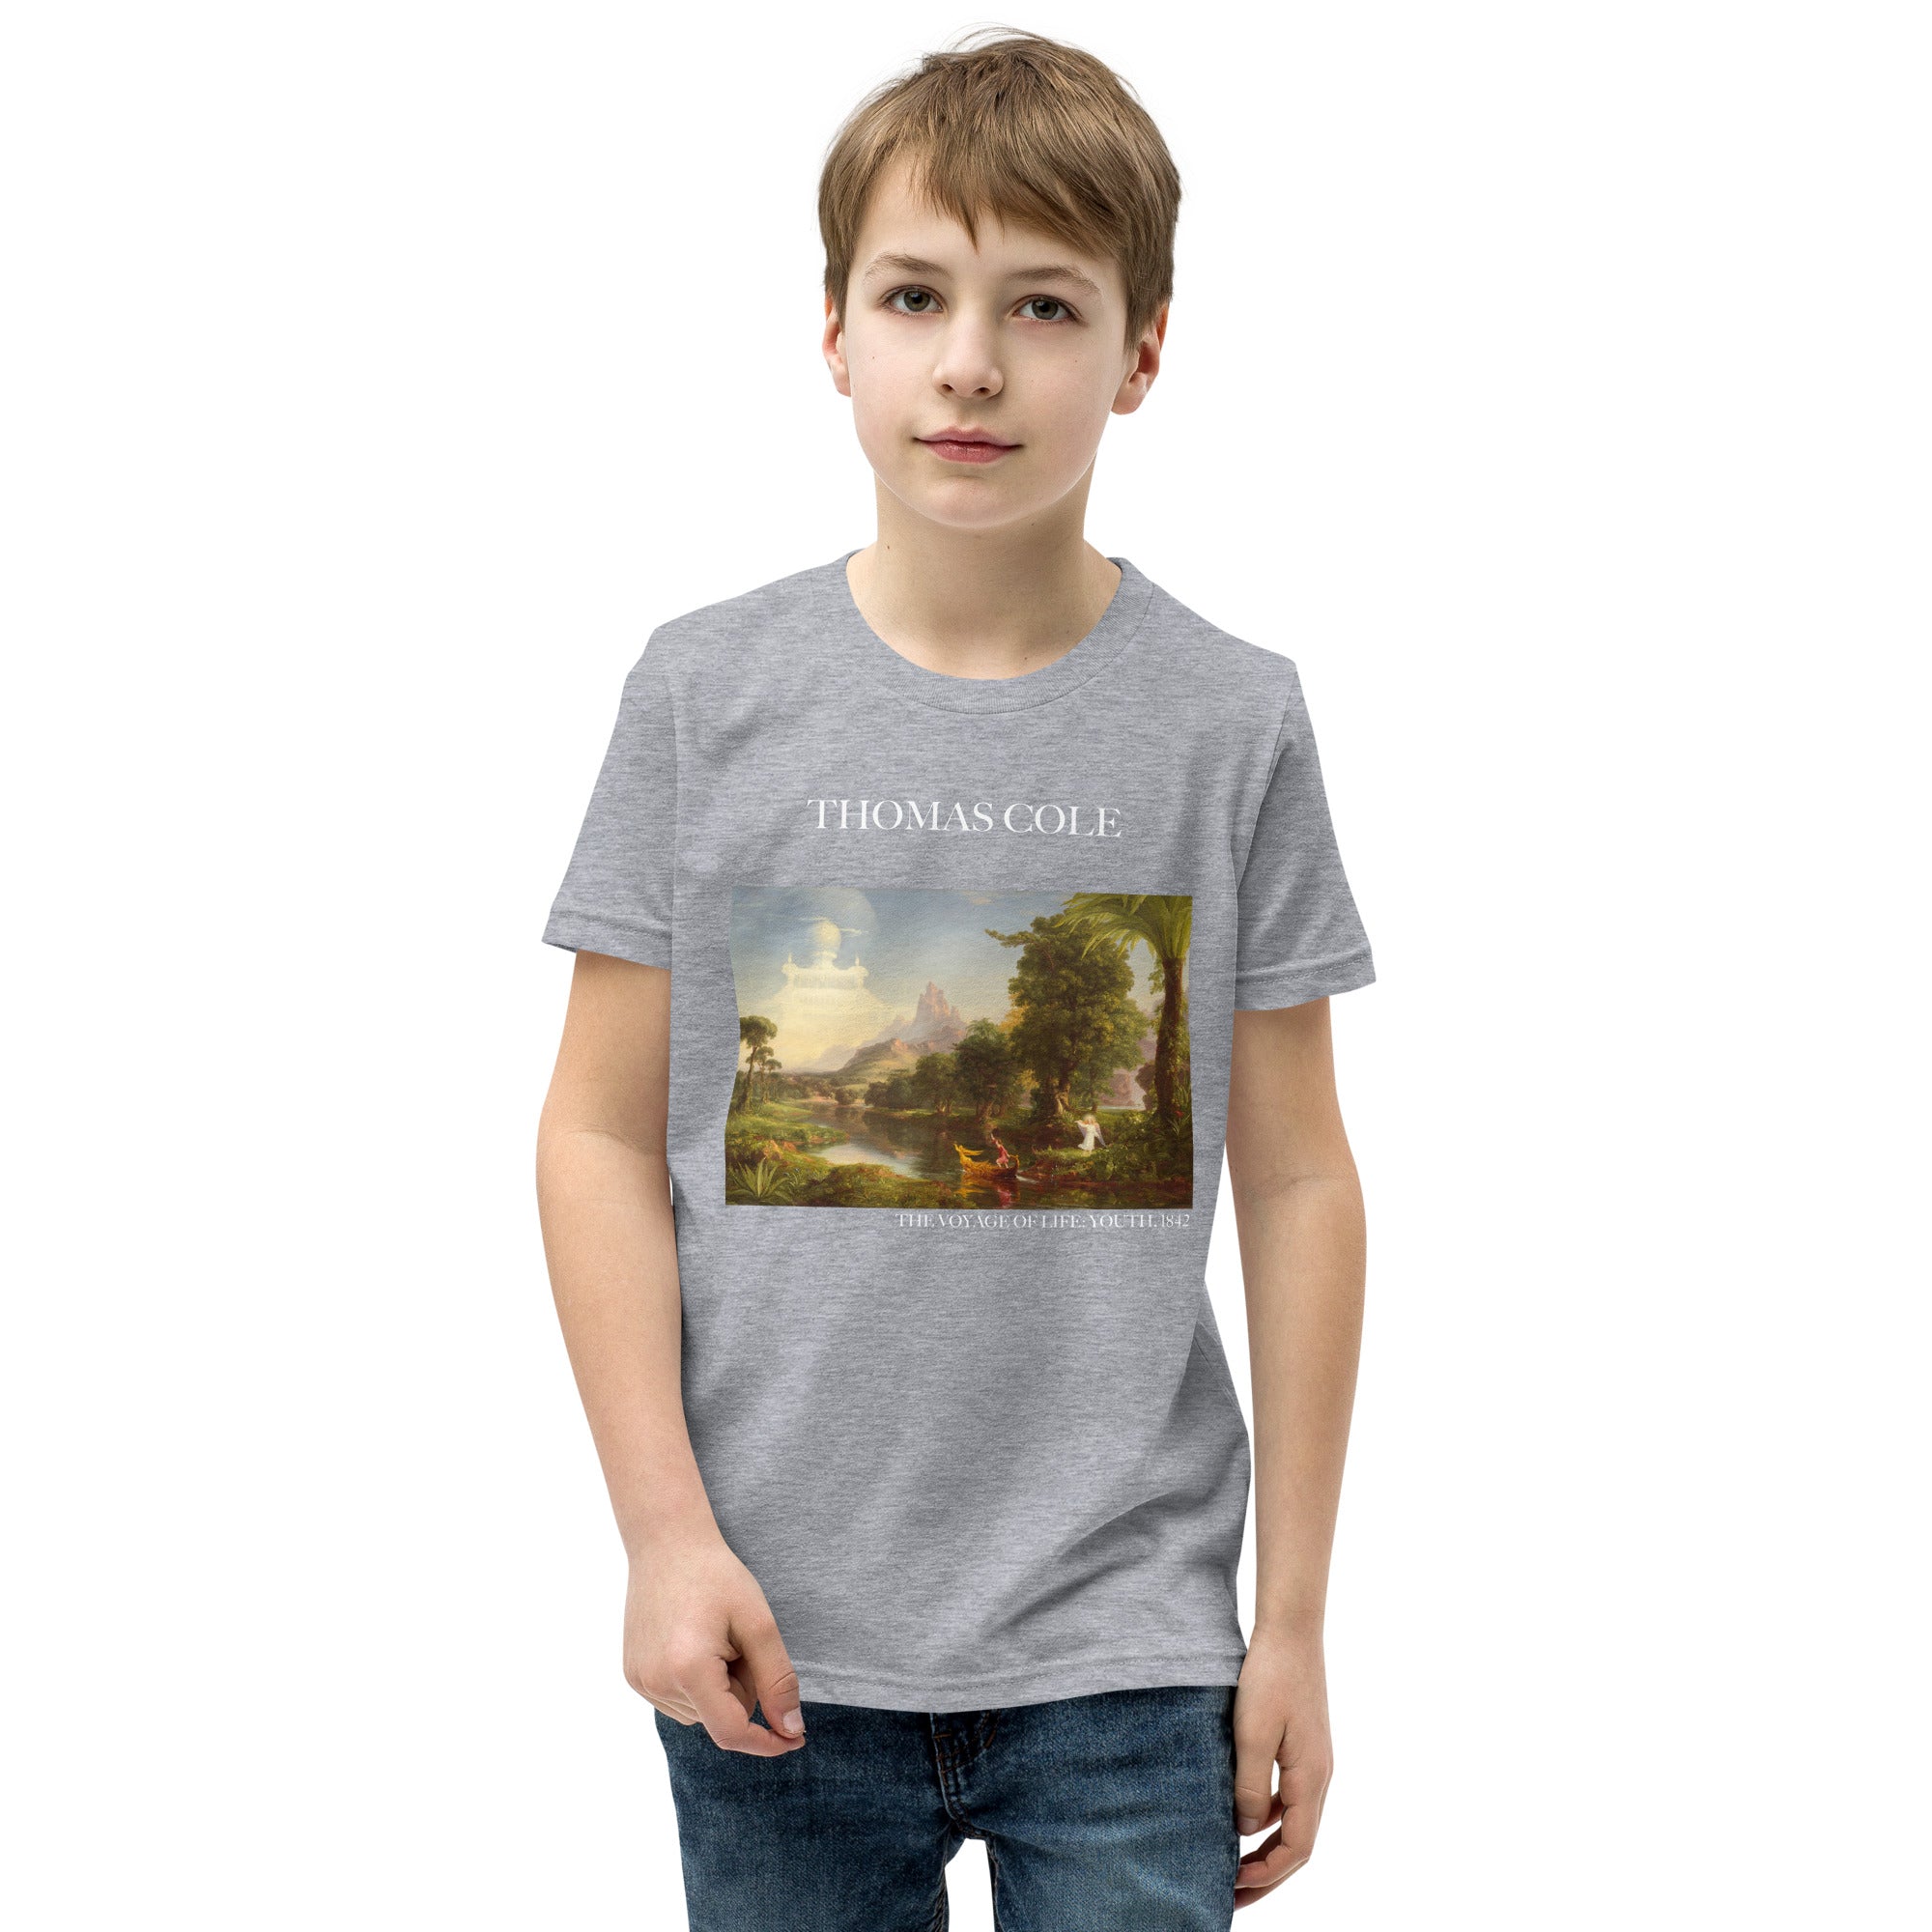 Thomas Cole 'The Voyage of Life: Youth' Famous Painting Short Sleeve T-Shirt | Premium Youth Art Tee